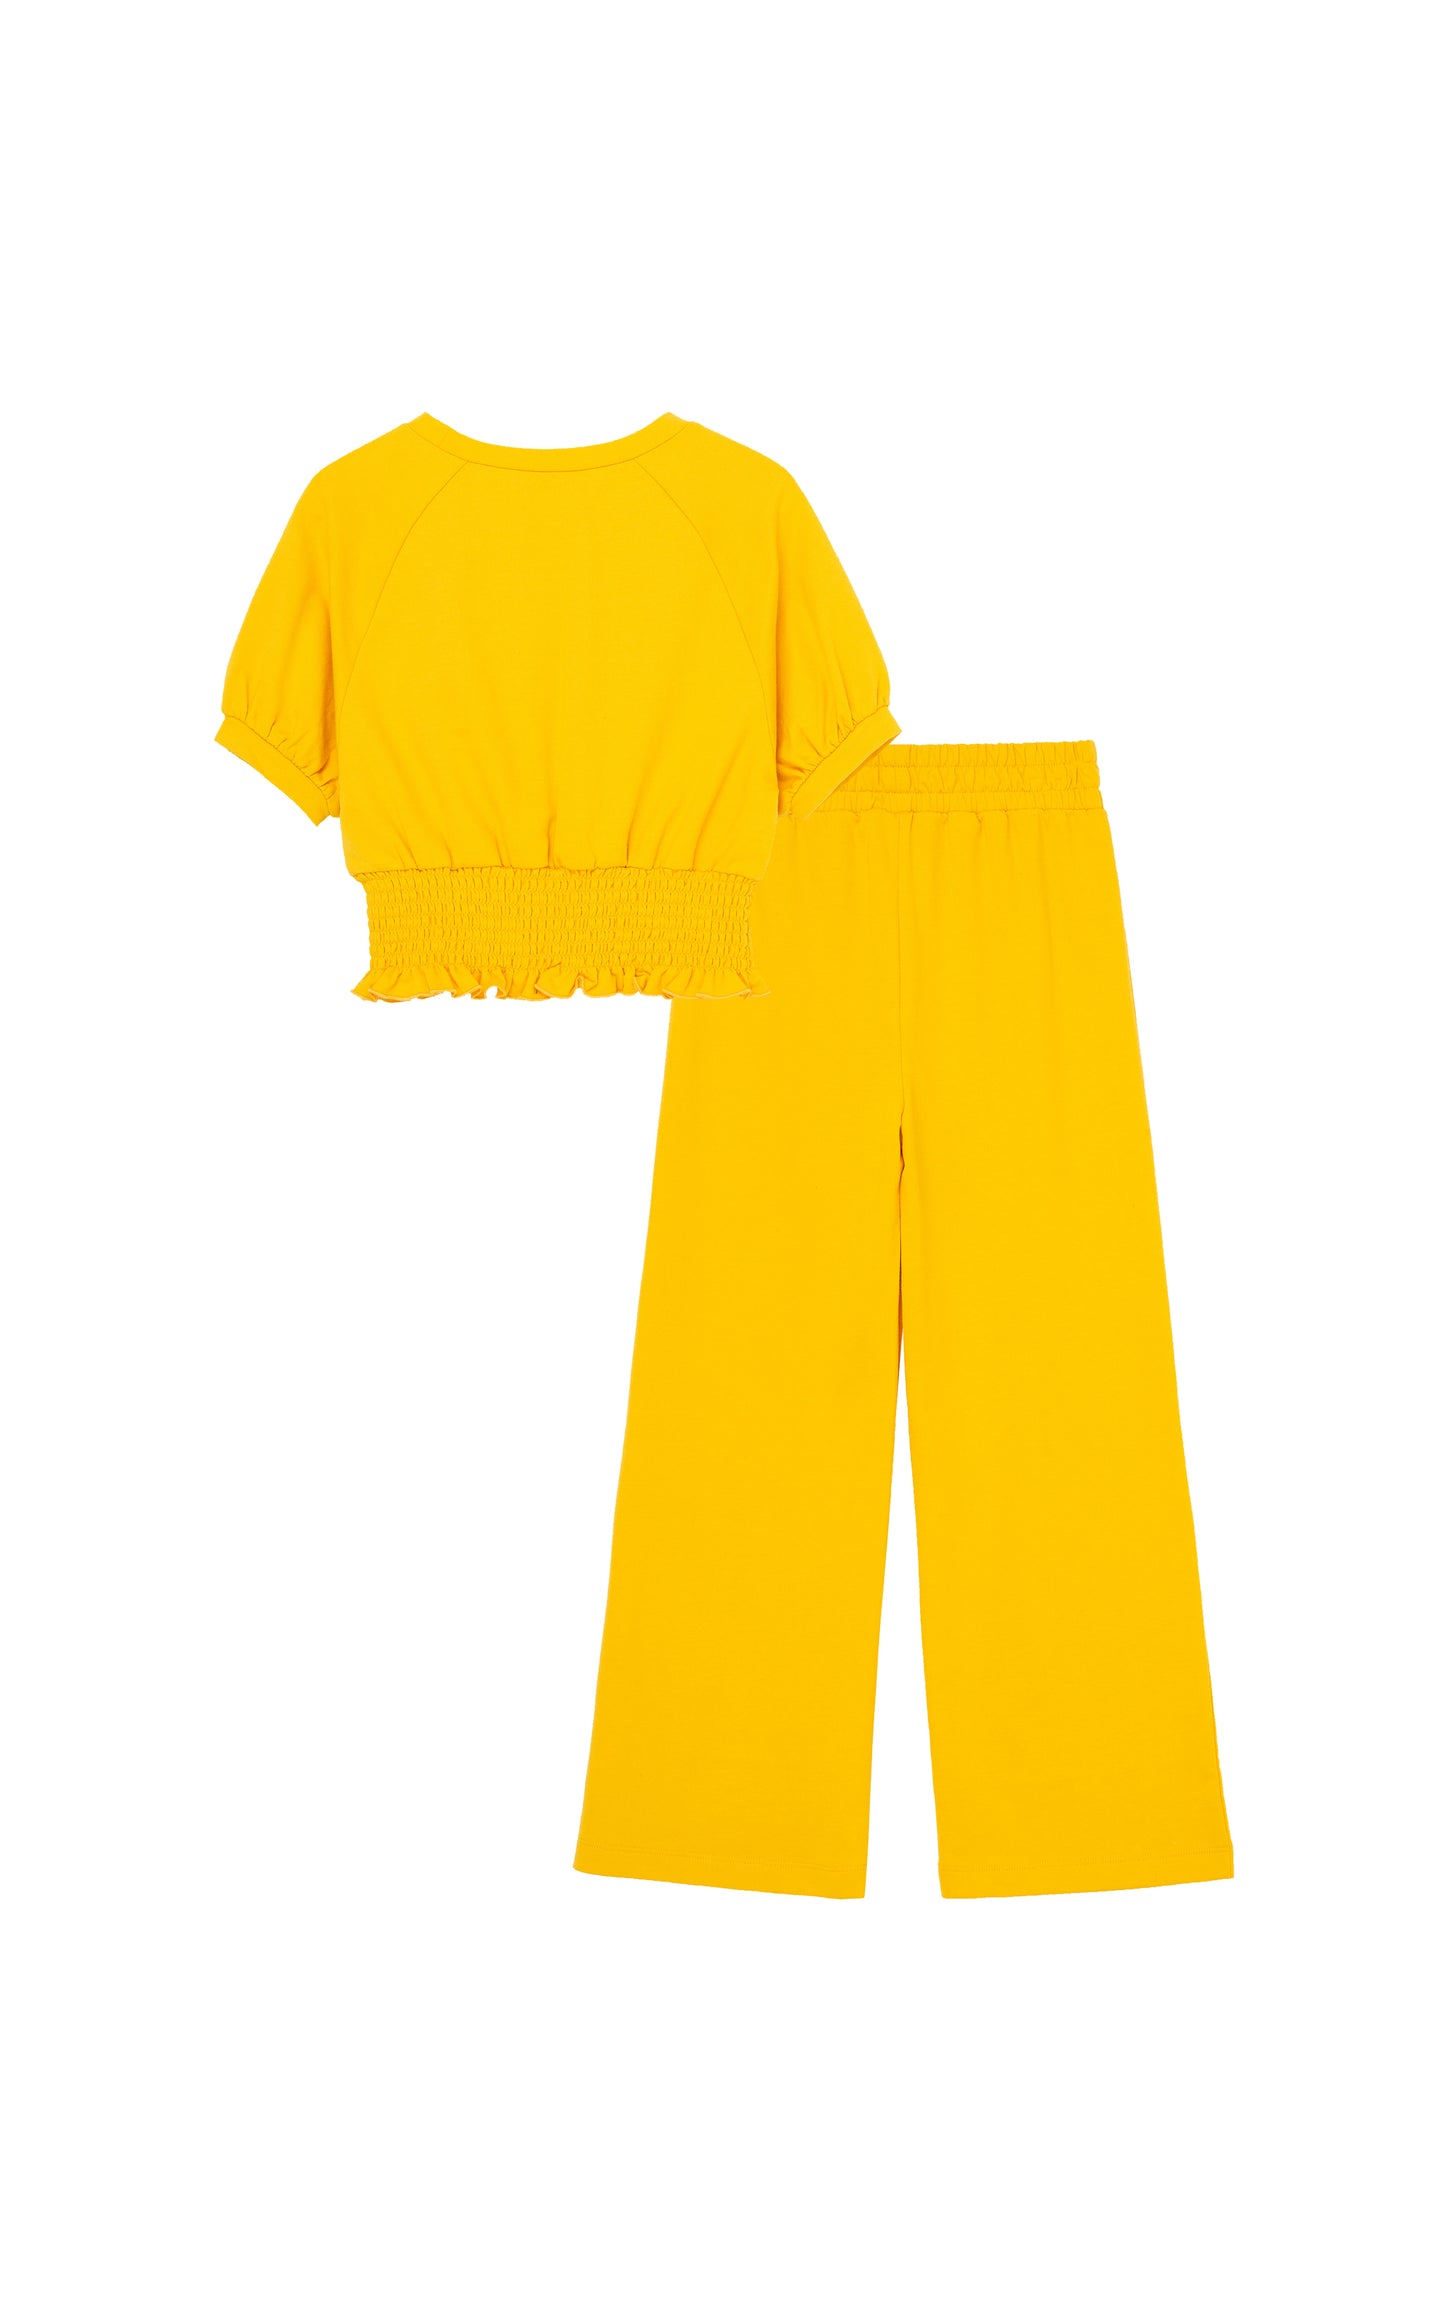 BACK OF BRIGHT YELLOW SHORT-SLEEVE SWEATSHIRT WITH RUCHED WAIST AND MATCHING SWEATPANTS WITH  FLARED BOTTOMS